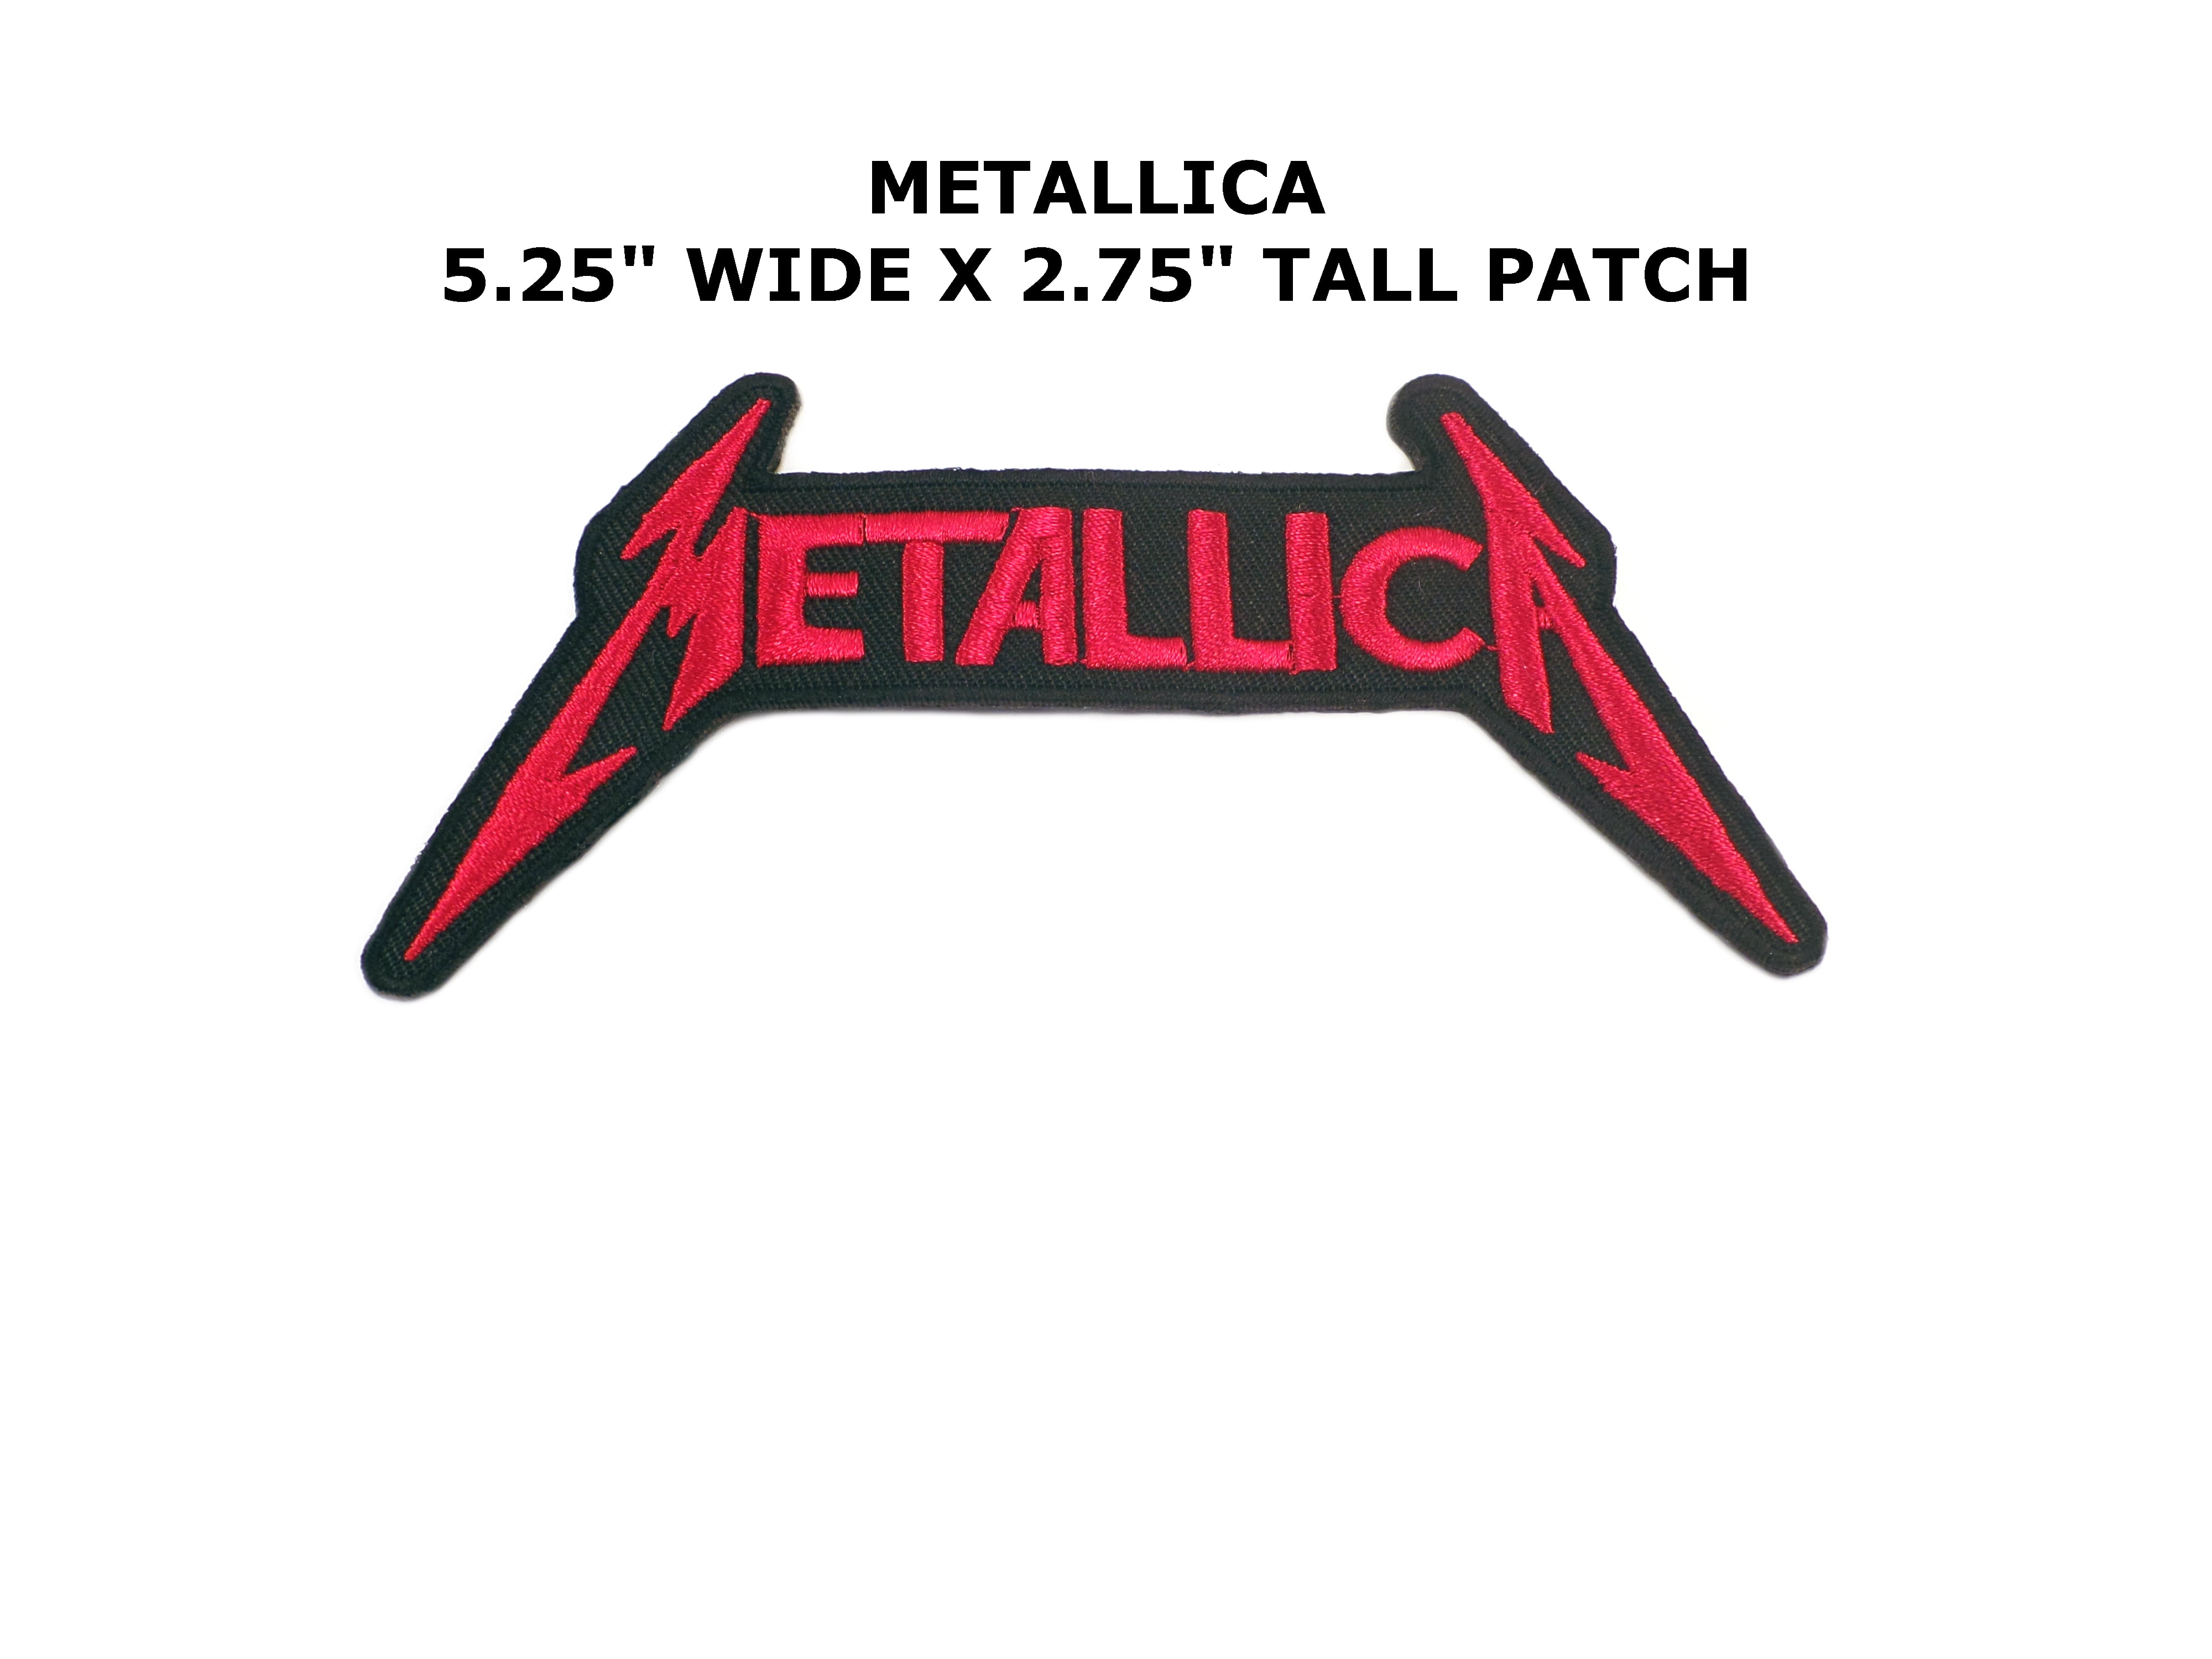 Metallica Heavy Metal Patch Patches~6 Versions~Embroidered Applique~Iron Sew On